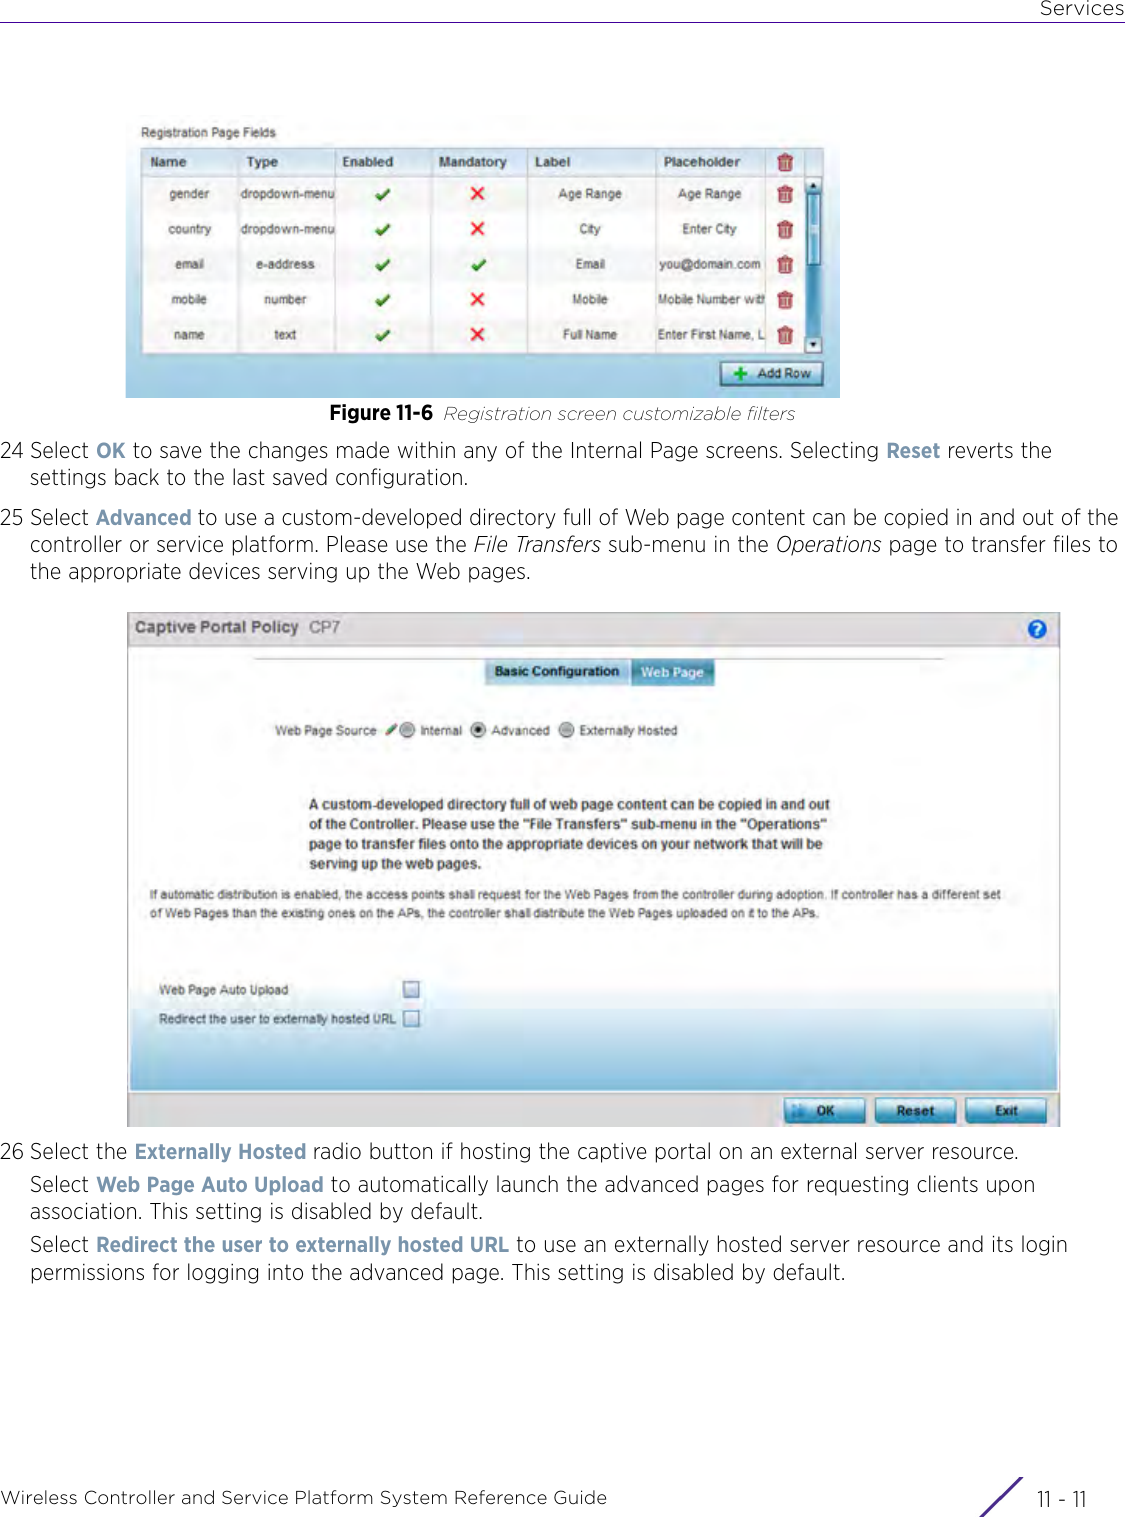 ServicesWireless Controller and Service Platform System Reference Guide 11 - 11Figure 11-6 Registration screen customizable filters24 Select OK to save the changes made within any of the Internal Page screens. Selecting Reset reverts the settings back to the last saved configuration.25 Select Advanced to use a custom-developed directory full of Web page content can be copied in and out of the controller or service platform. Please use the File Transfers sub-menu in the Operations page to transfer files to the appropriate devices serving up the Web pages.26 Select the Externally Hosted radio button if hosting the captive portal on an external server resource.Select Web Page Auto Upload to automatically launch the advanced pages for requesting clients upon association. This setting is disabled by default.Select Redirect the user to externally hosted URL to use an externally hosted server resource and its login permissions for logging into the advanced page. This setting is disabled by default.